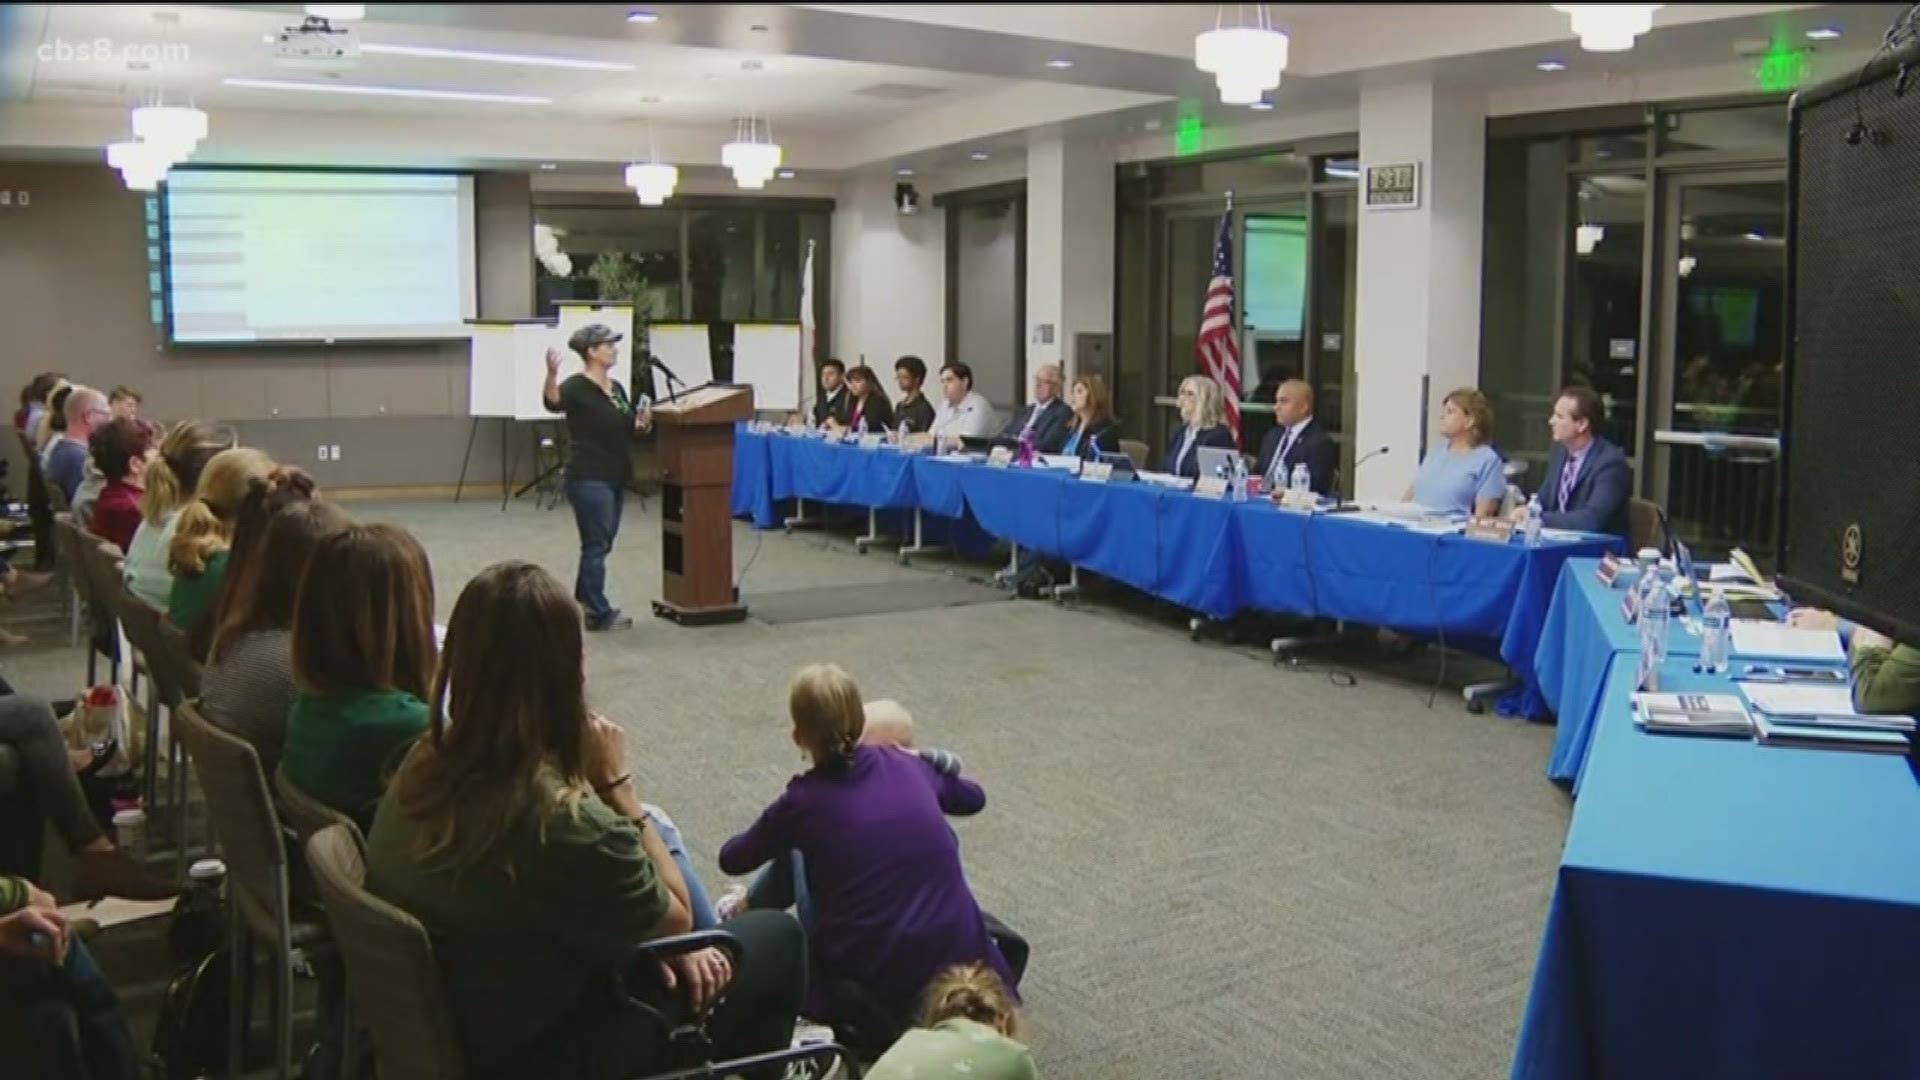 Parents, teachers and students crowded the Vista Unified School Board meeting Thursday night wearing green shirts and ribbons calling for safety at its schools.